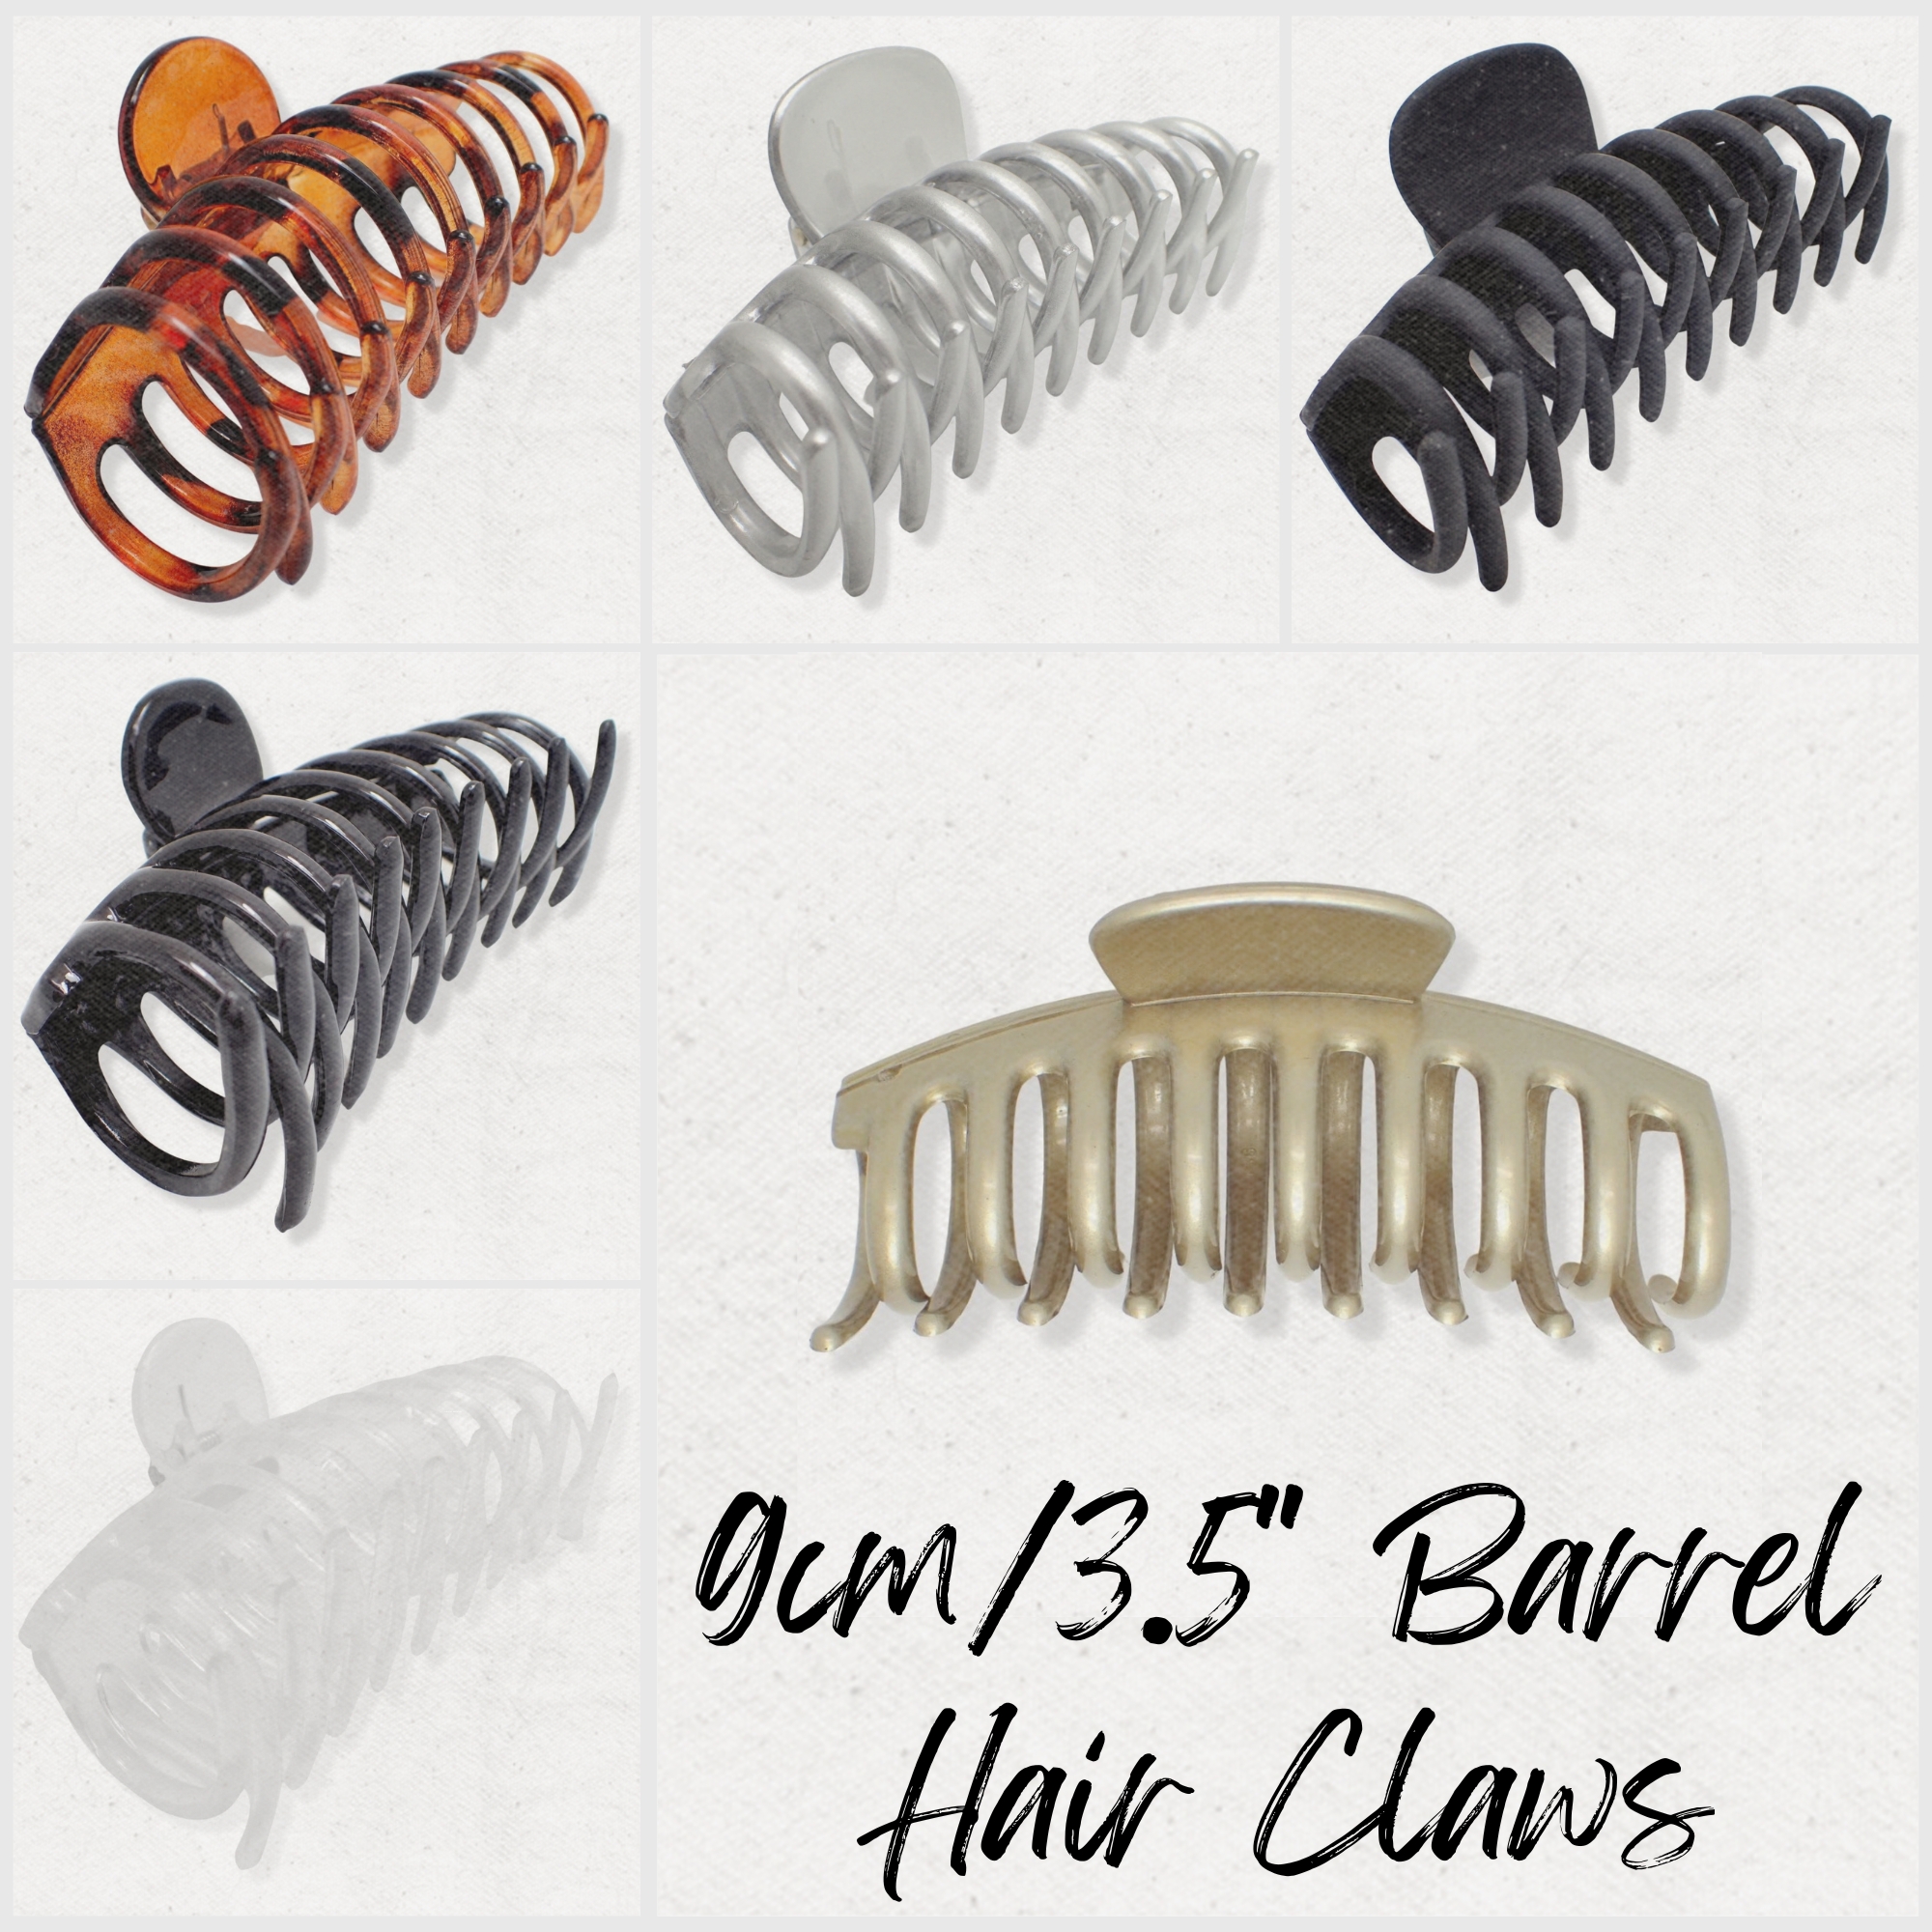 48 Sets of 6 Pieces (288 items) Barrel / Sausage Hair Claw 9cm/3.5